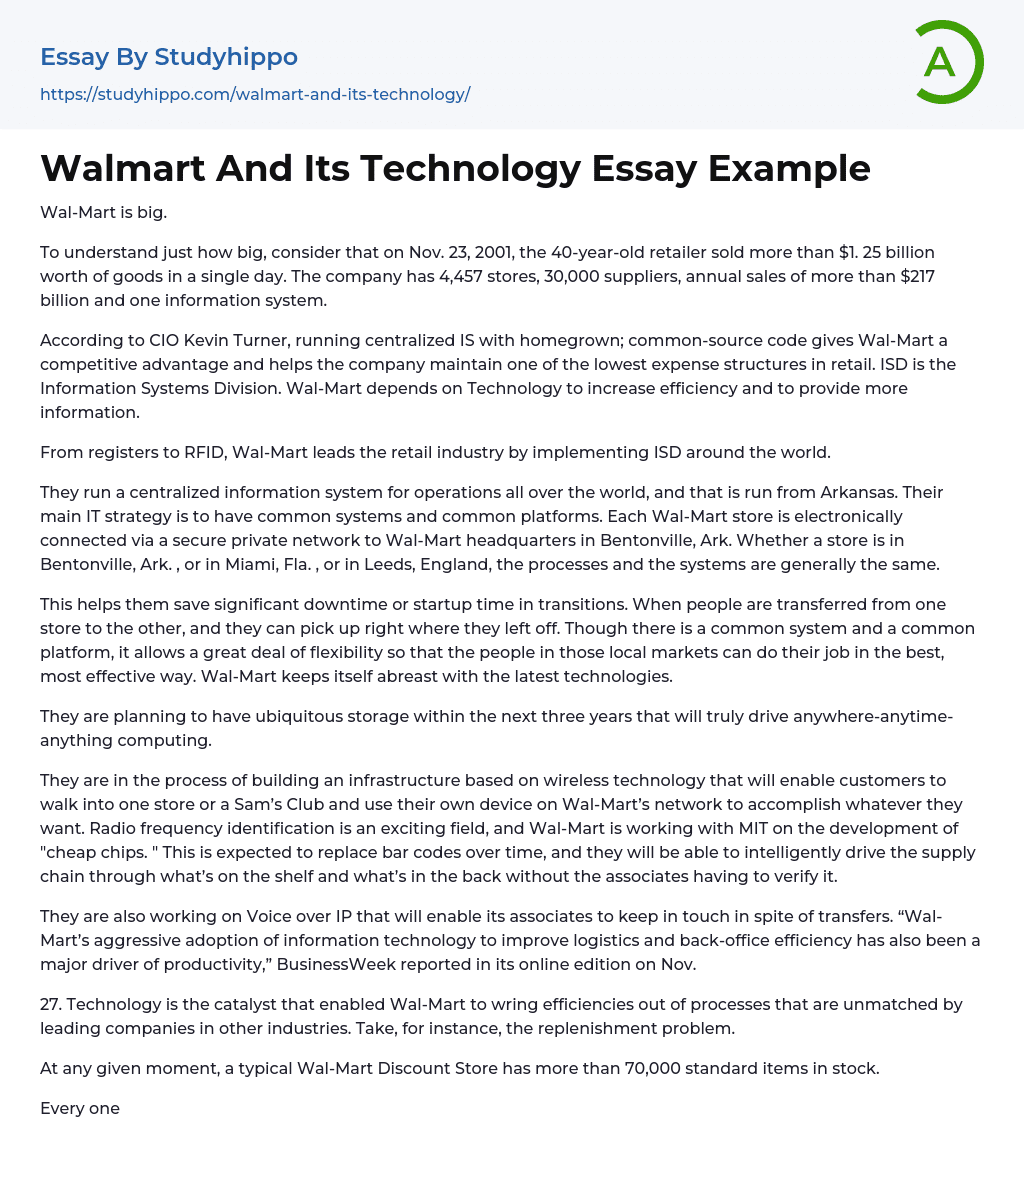 Walmart And Its Technology Essay Example